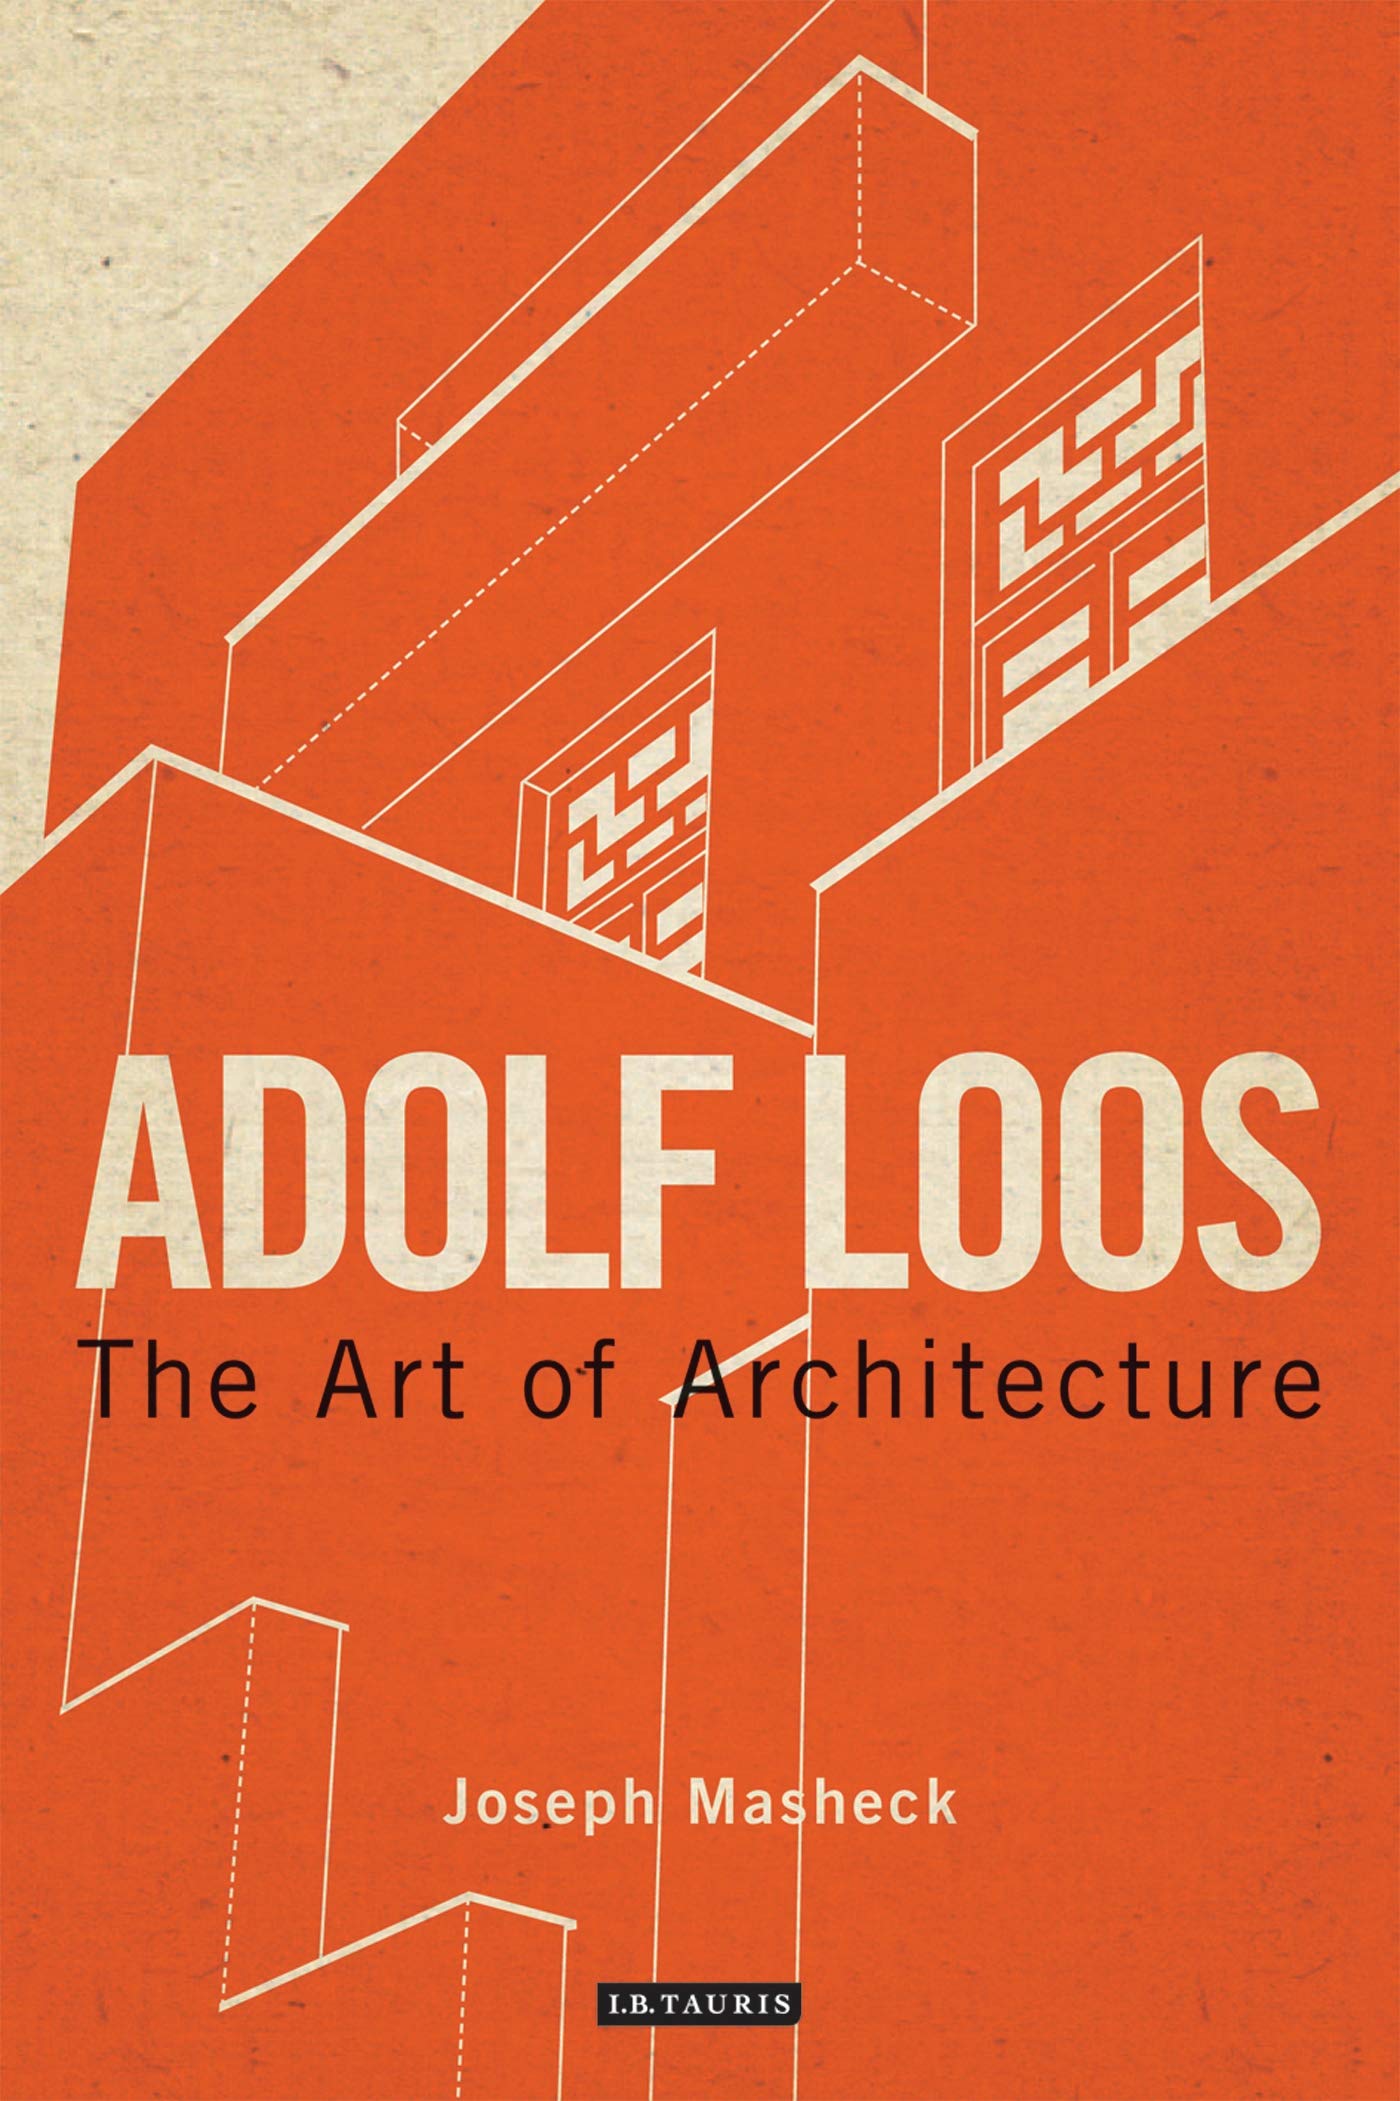 Adolf Loos: The Art of Architecture (International Library of Architecture)